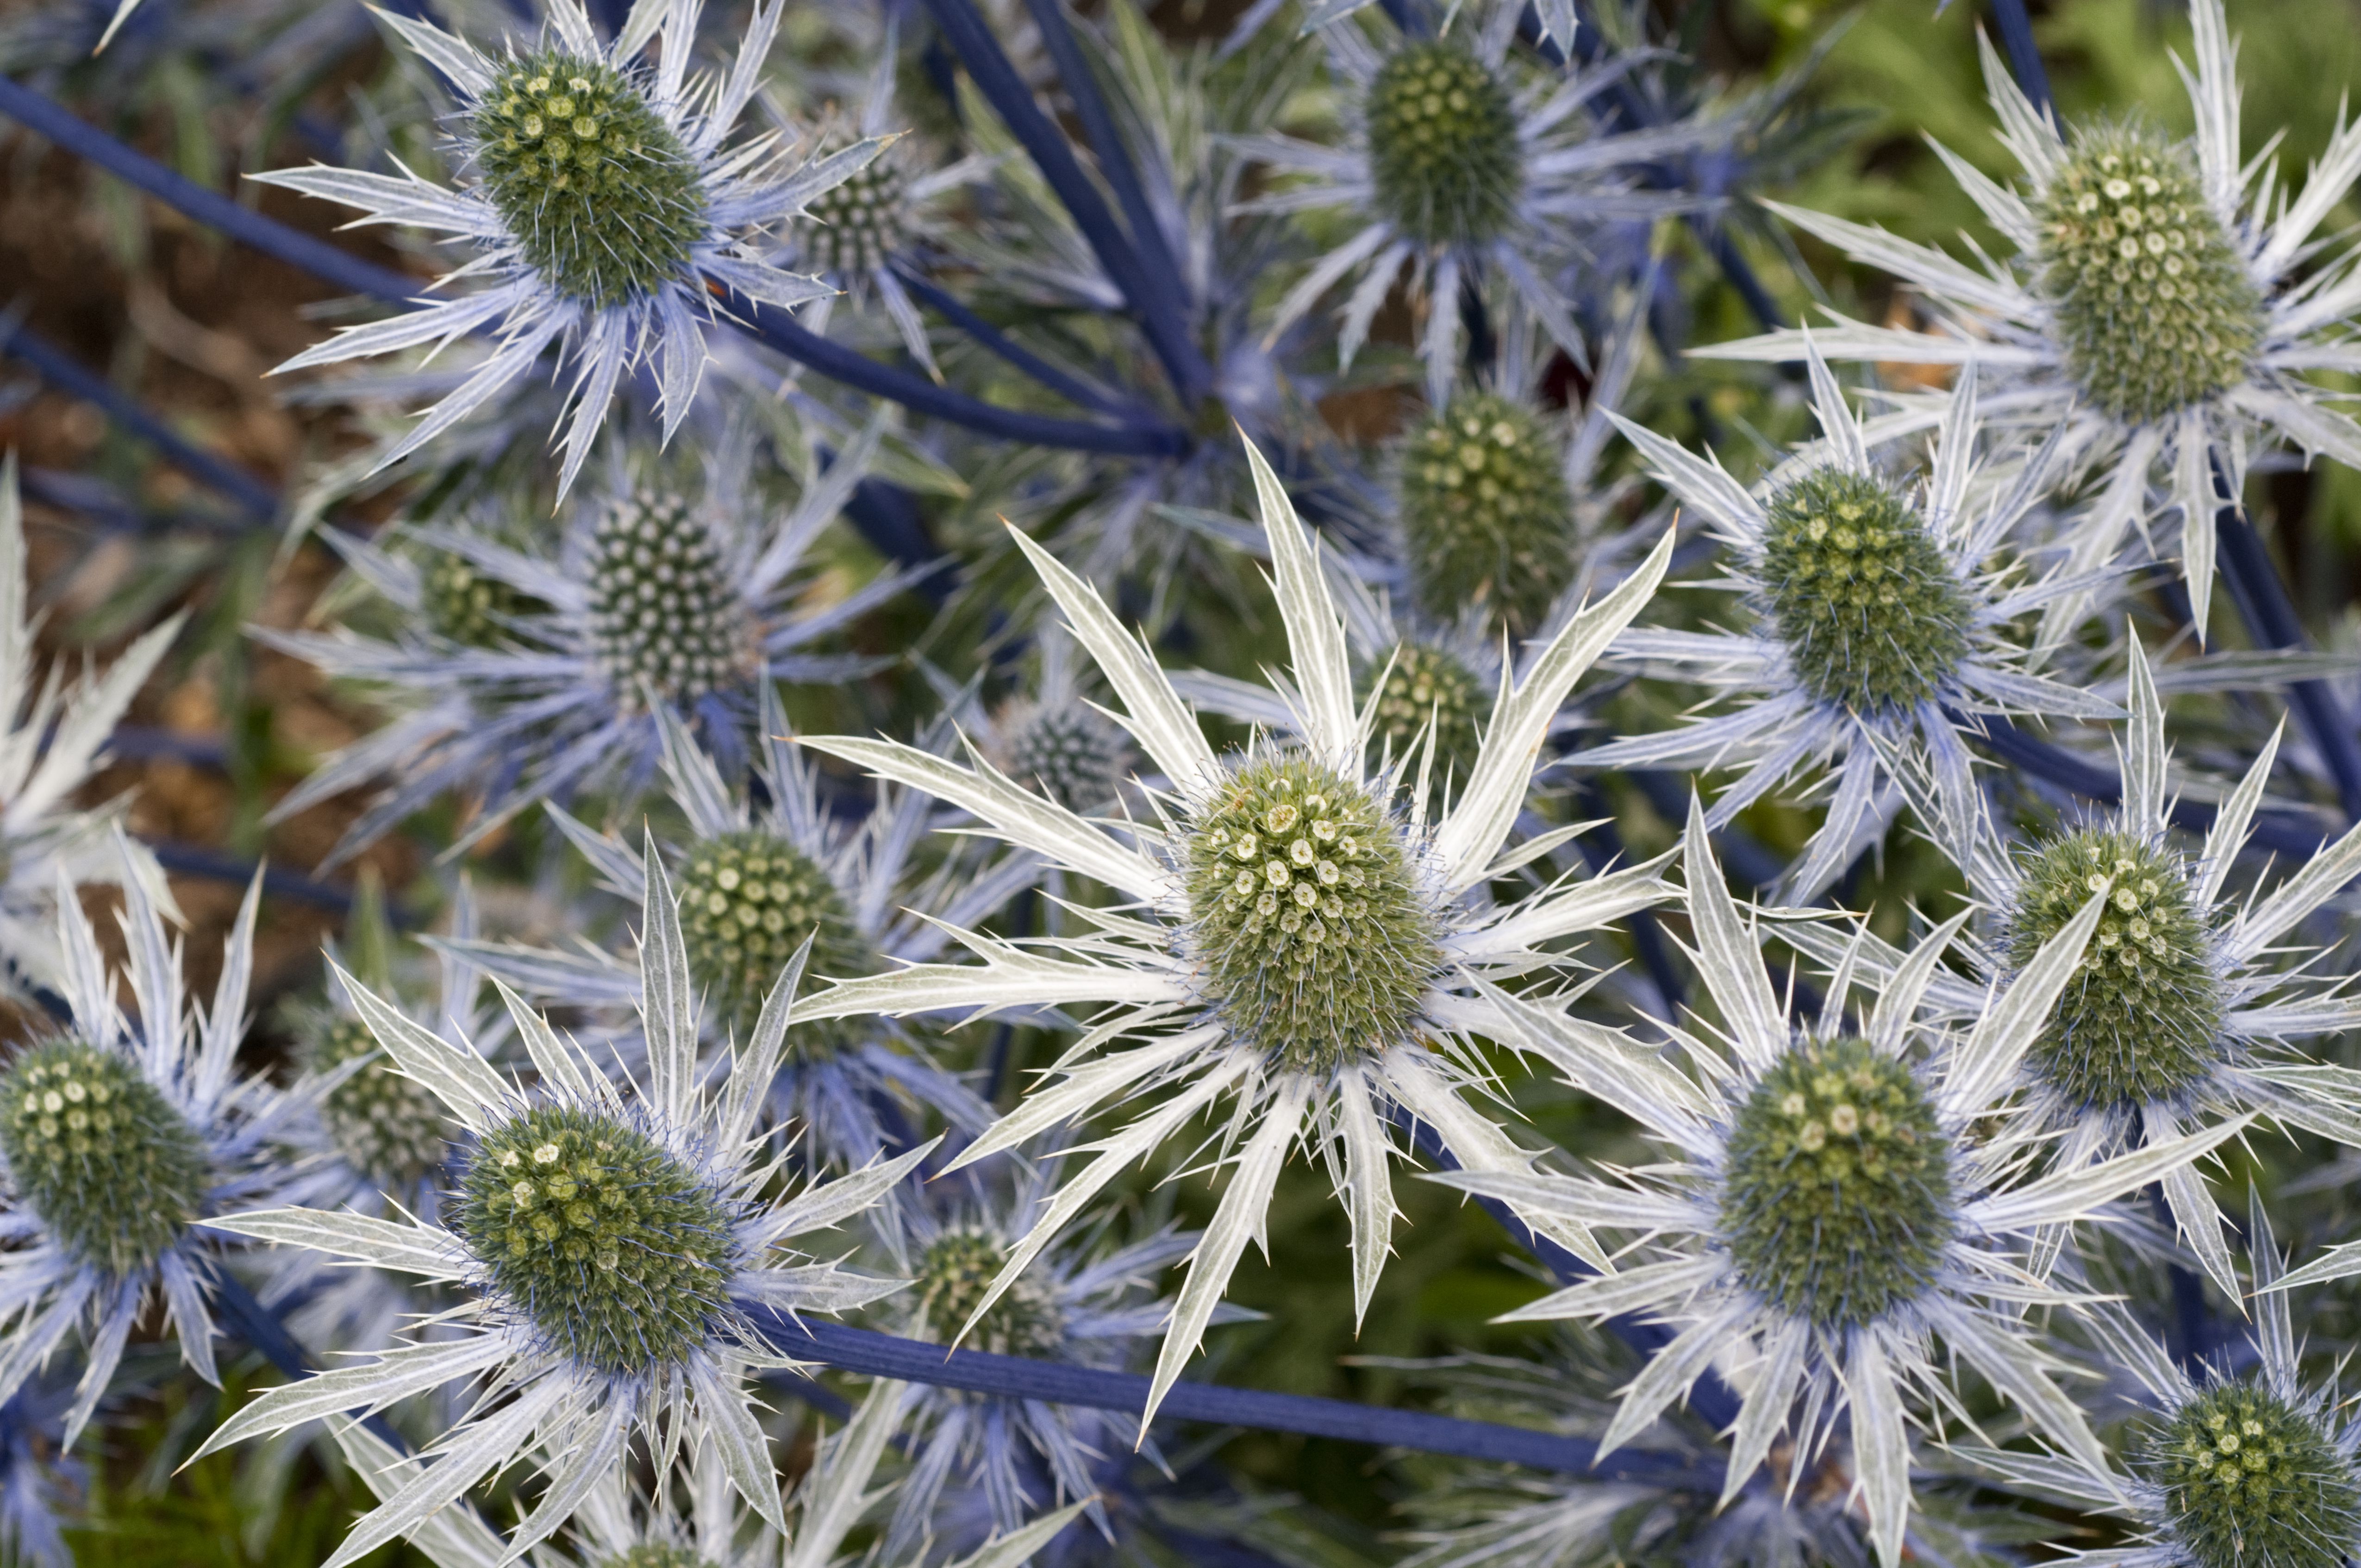 How to Grow and Care for Sea Holly (Eryngium)